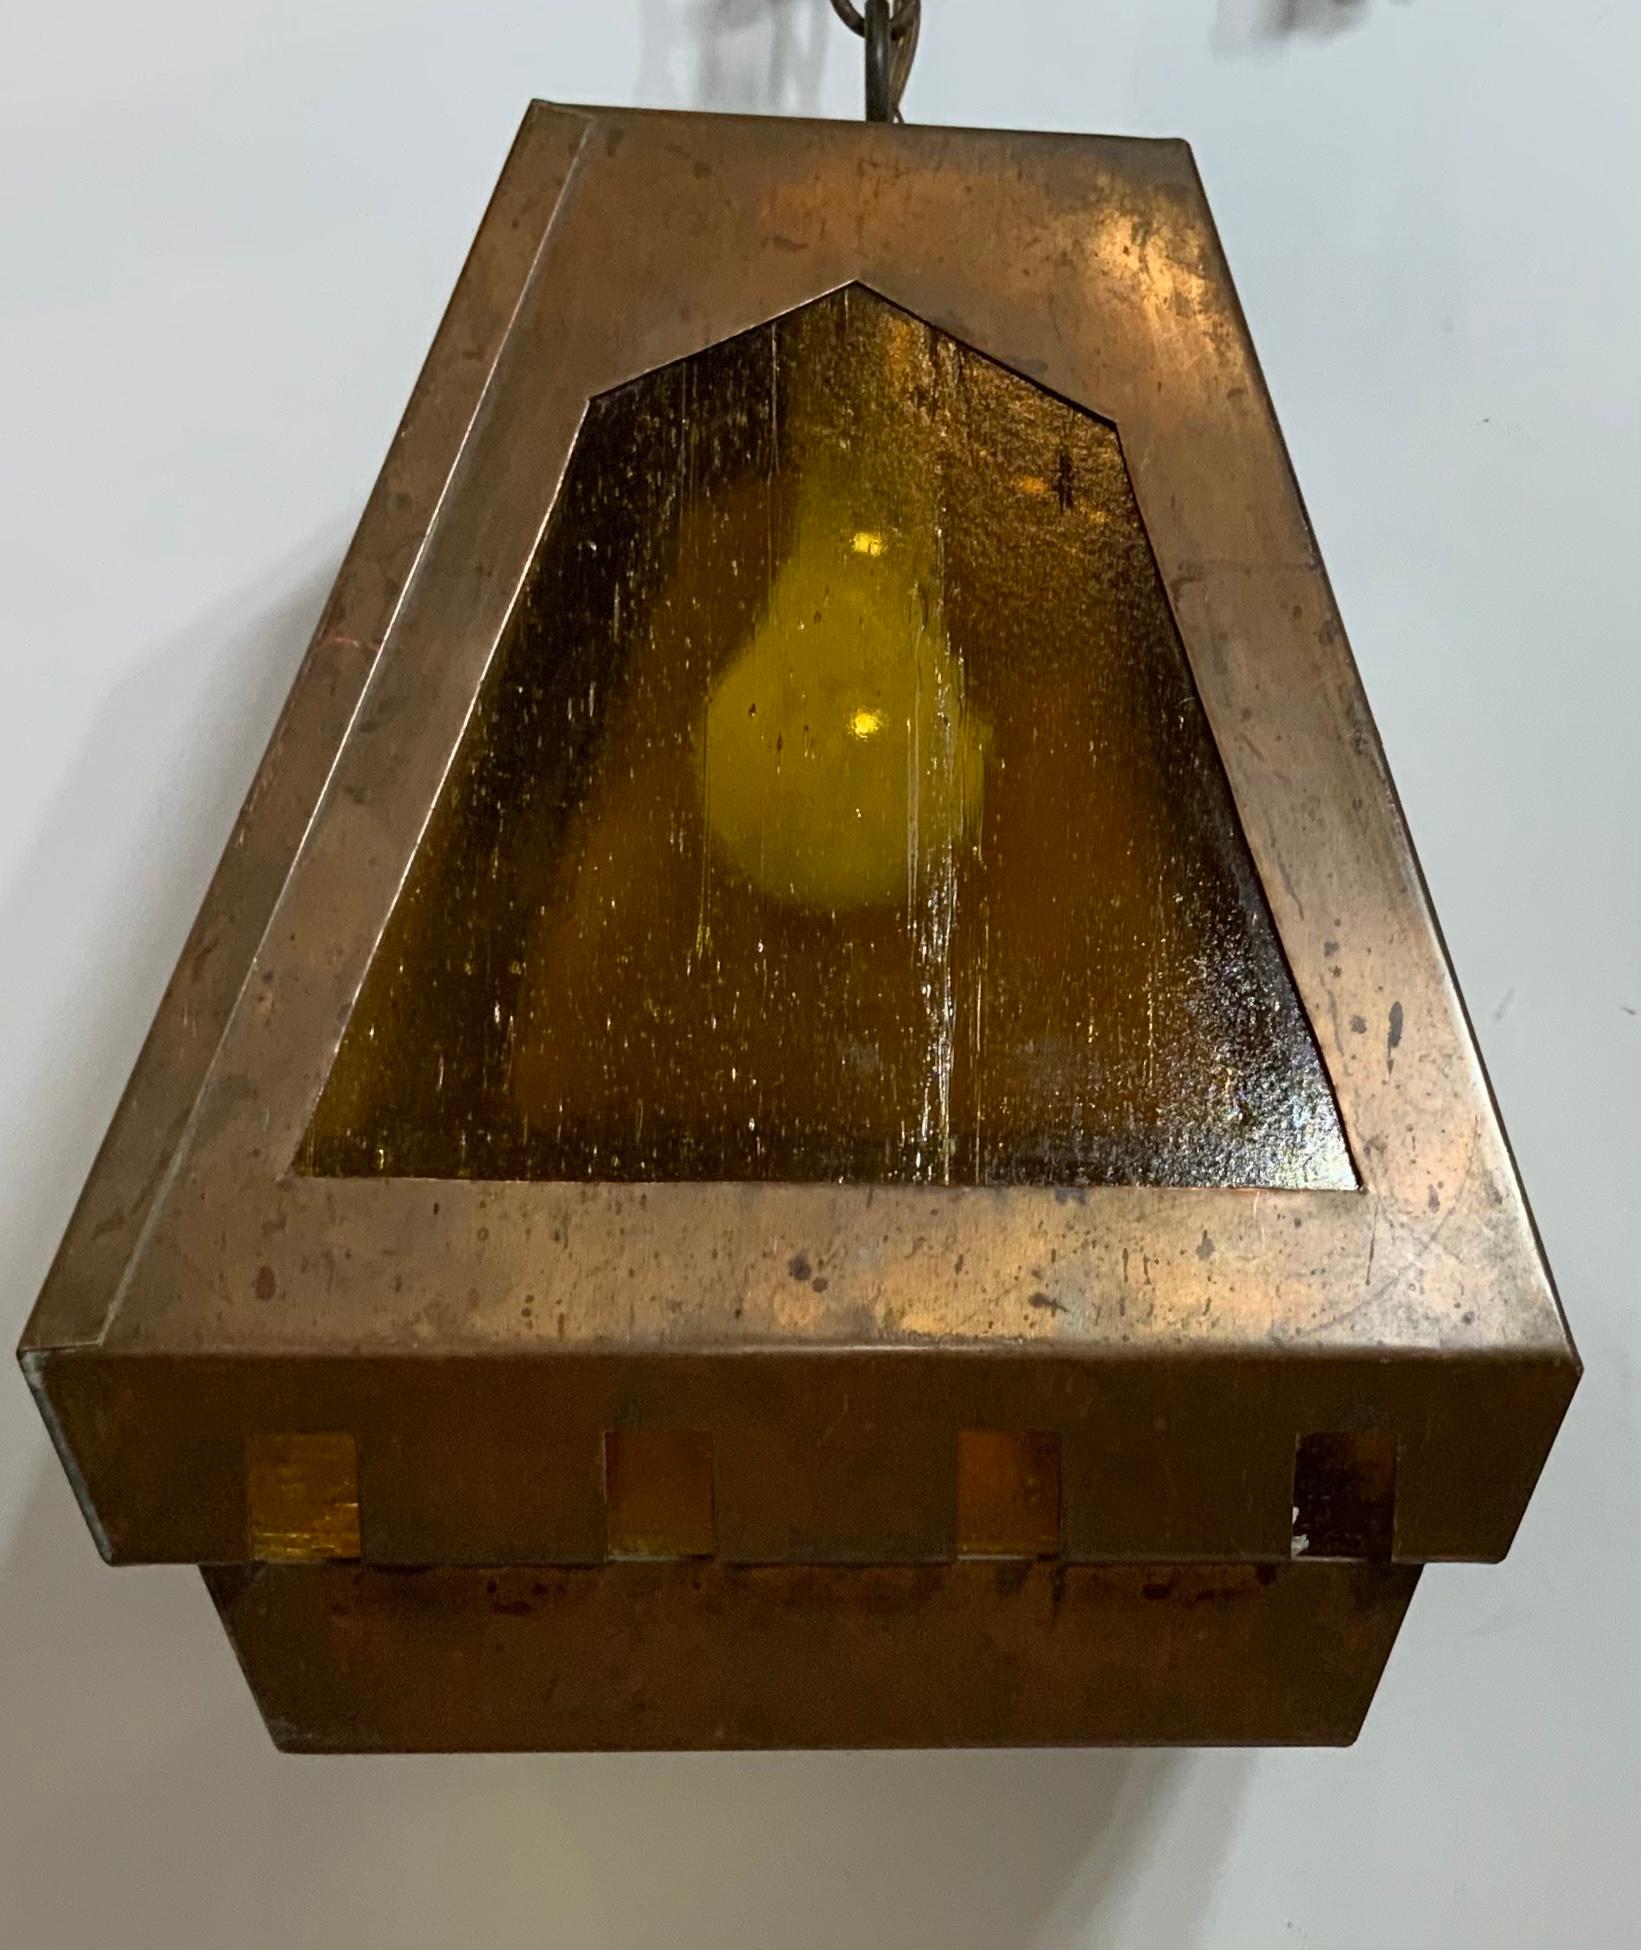 Hanging Art and Craft Style Copper Lantern In Good Condition For Sale In Delray Beach, FL